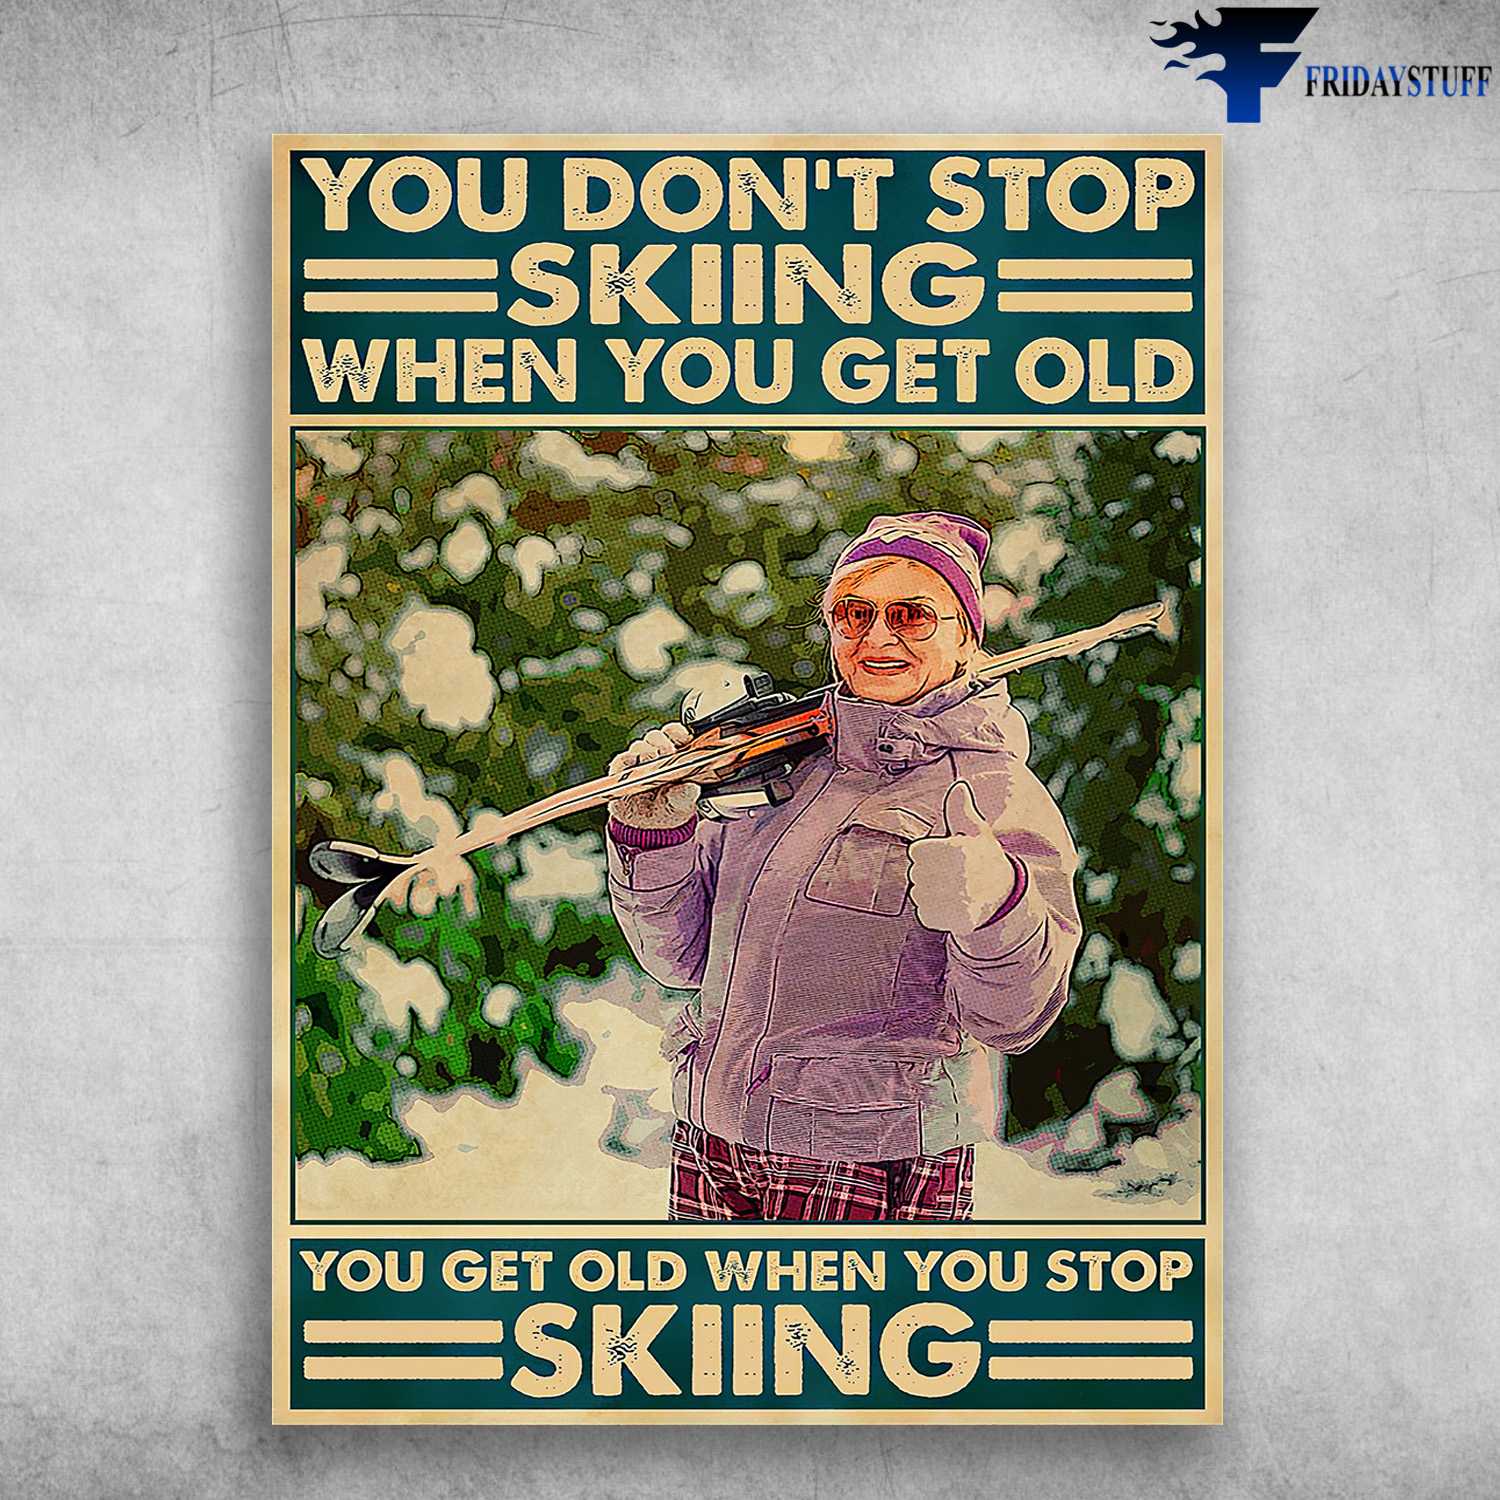 Skiing Old Lady, Skiing Lover, You Don't Stop Skiing When You Get Old, You Get Old When You Stop Skiing